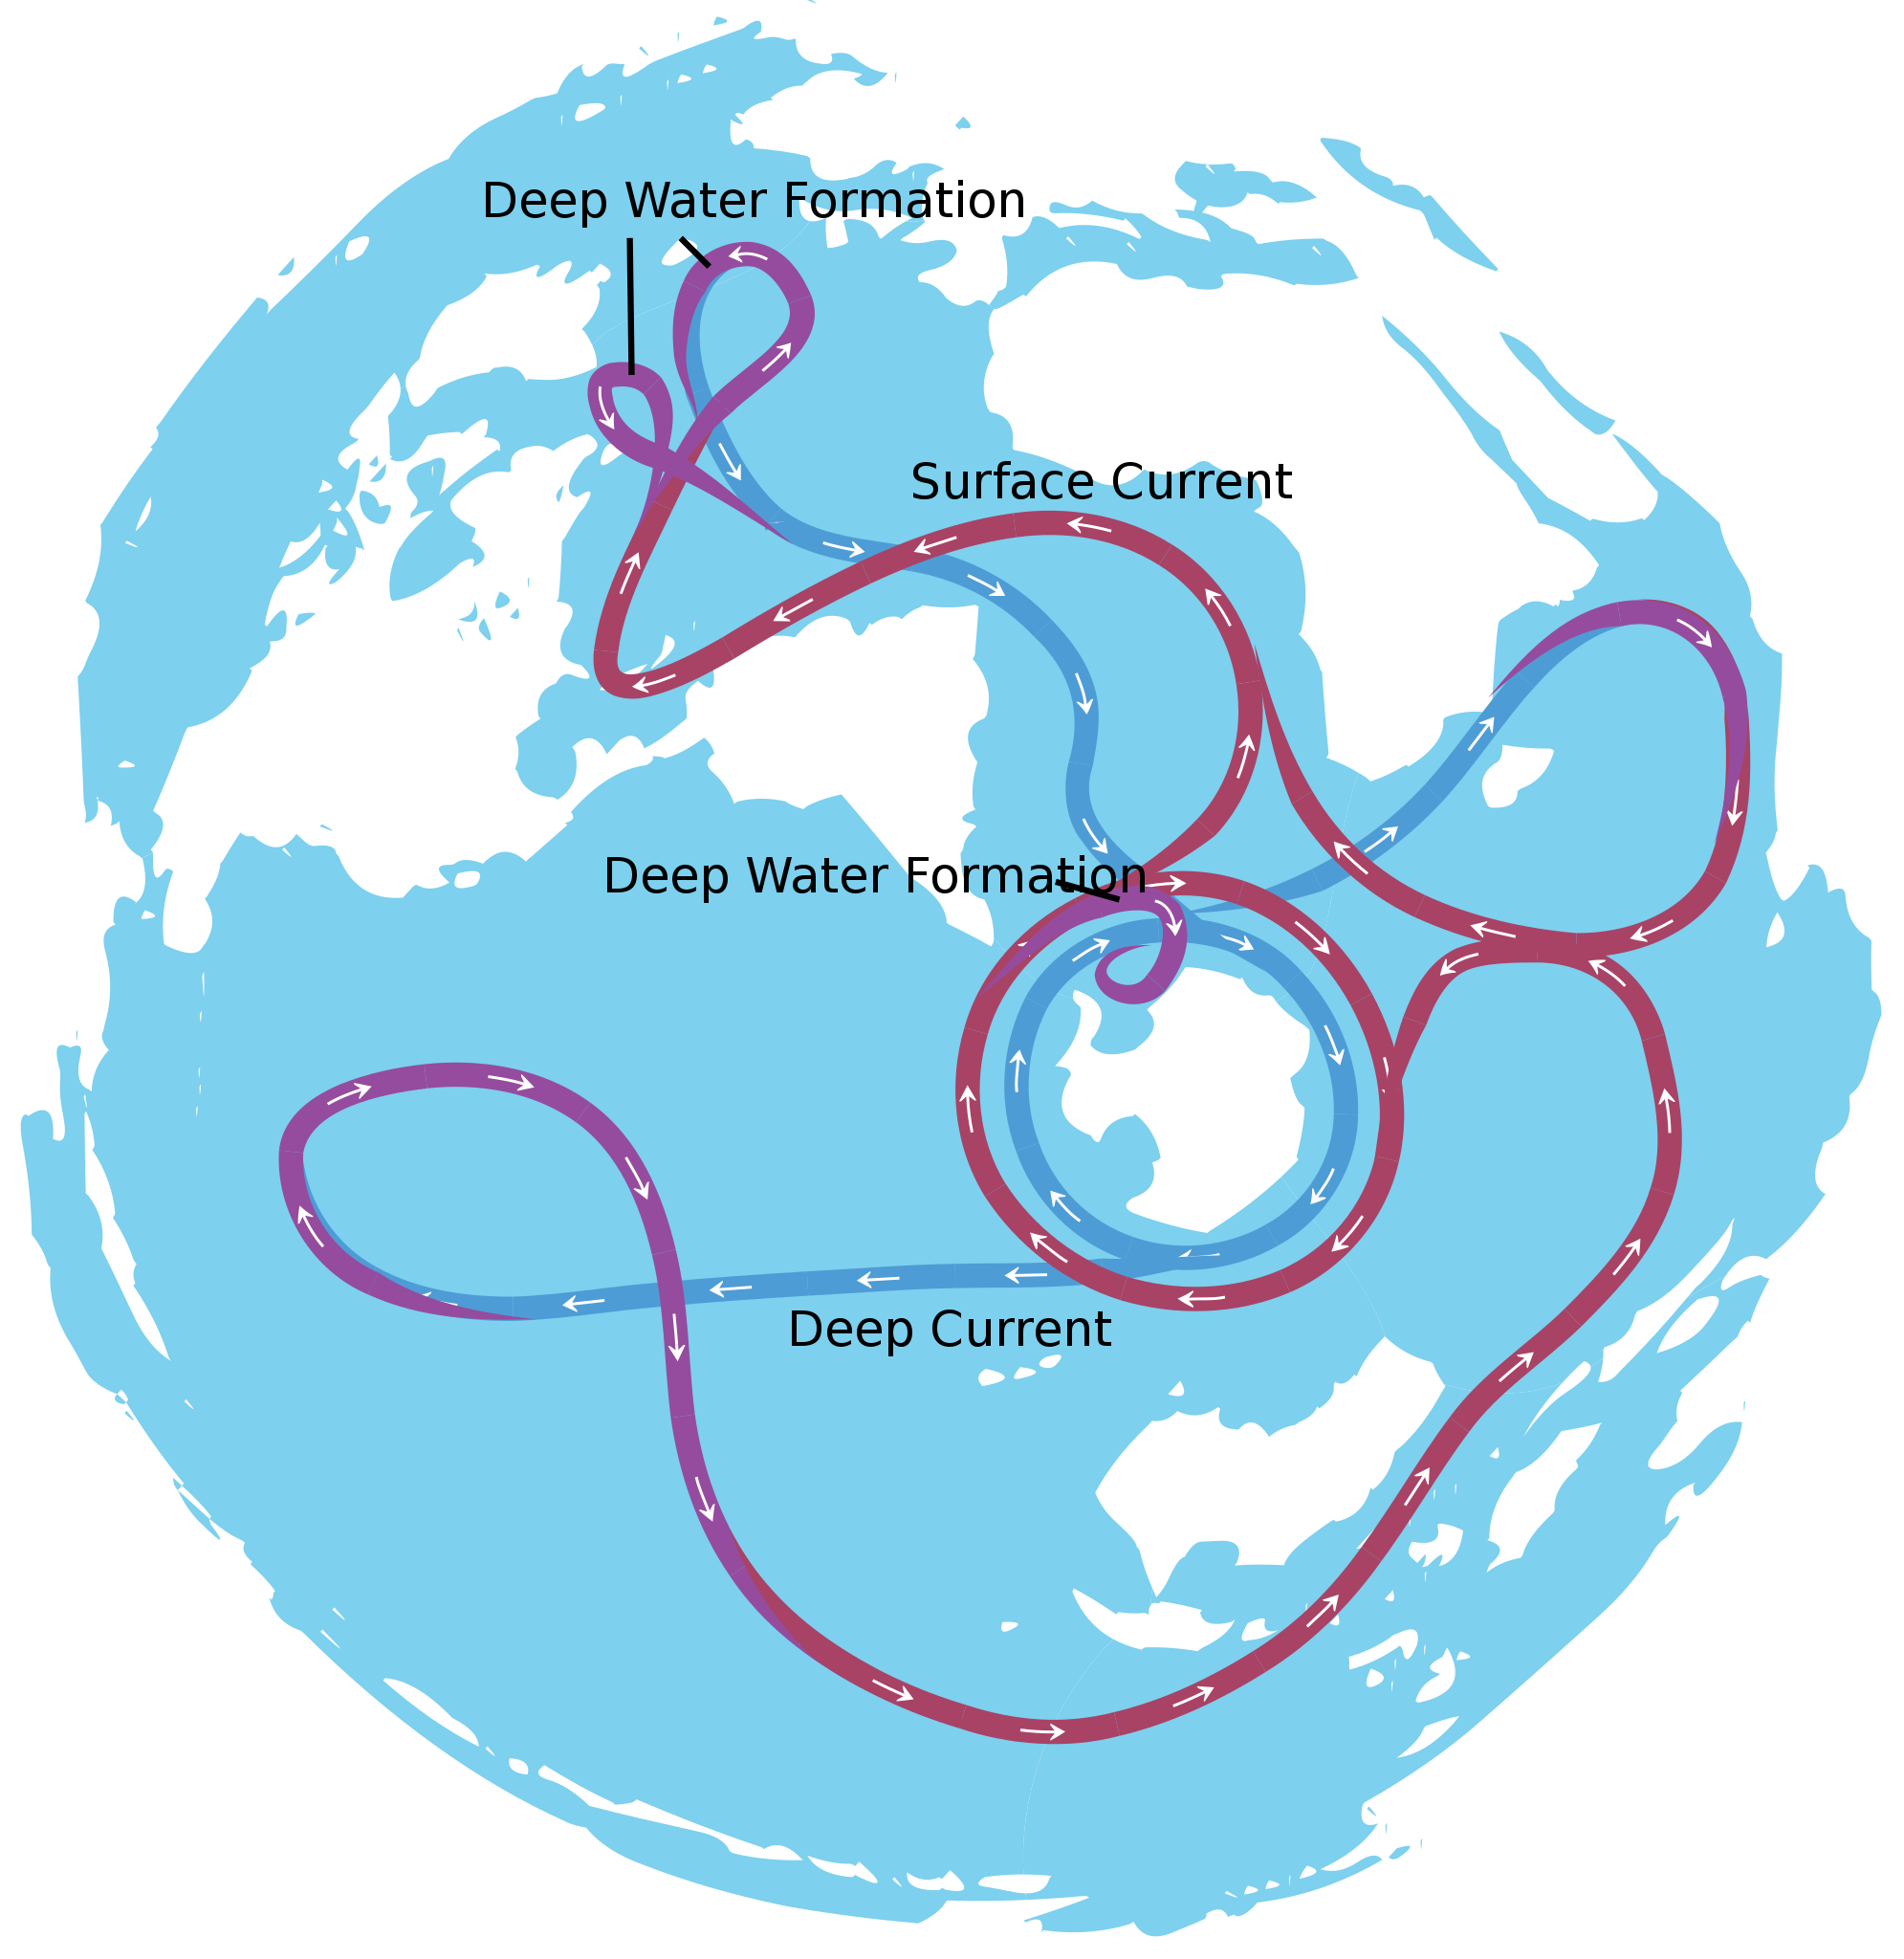 Map of bottom of earth showing Antarctic continent and an ocean current circulating clockwise around it.